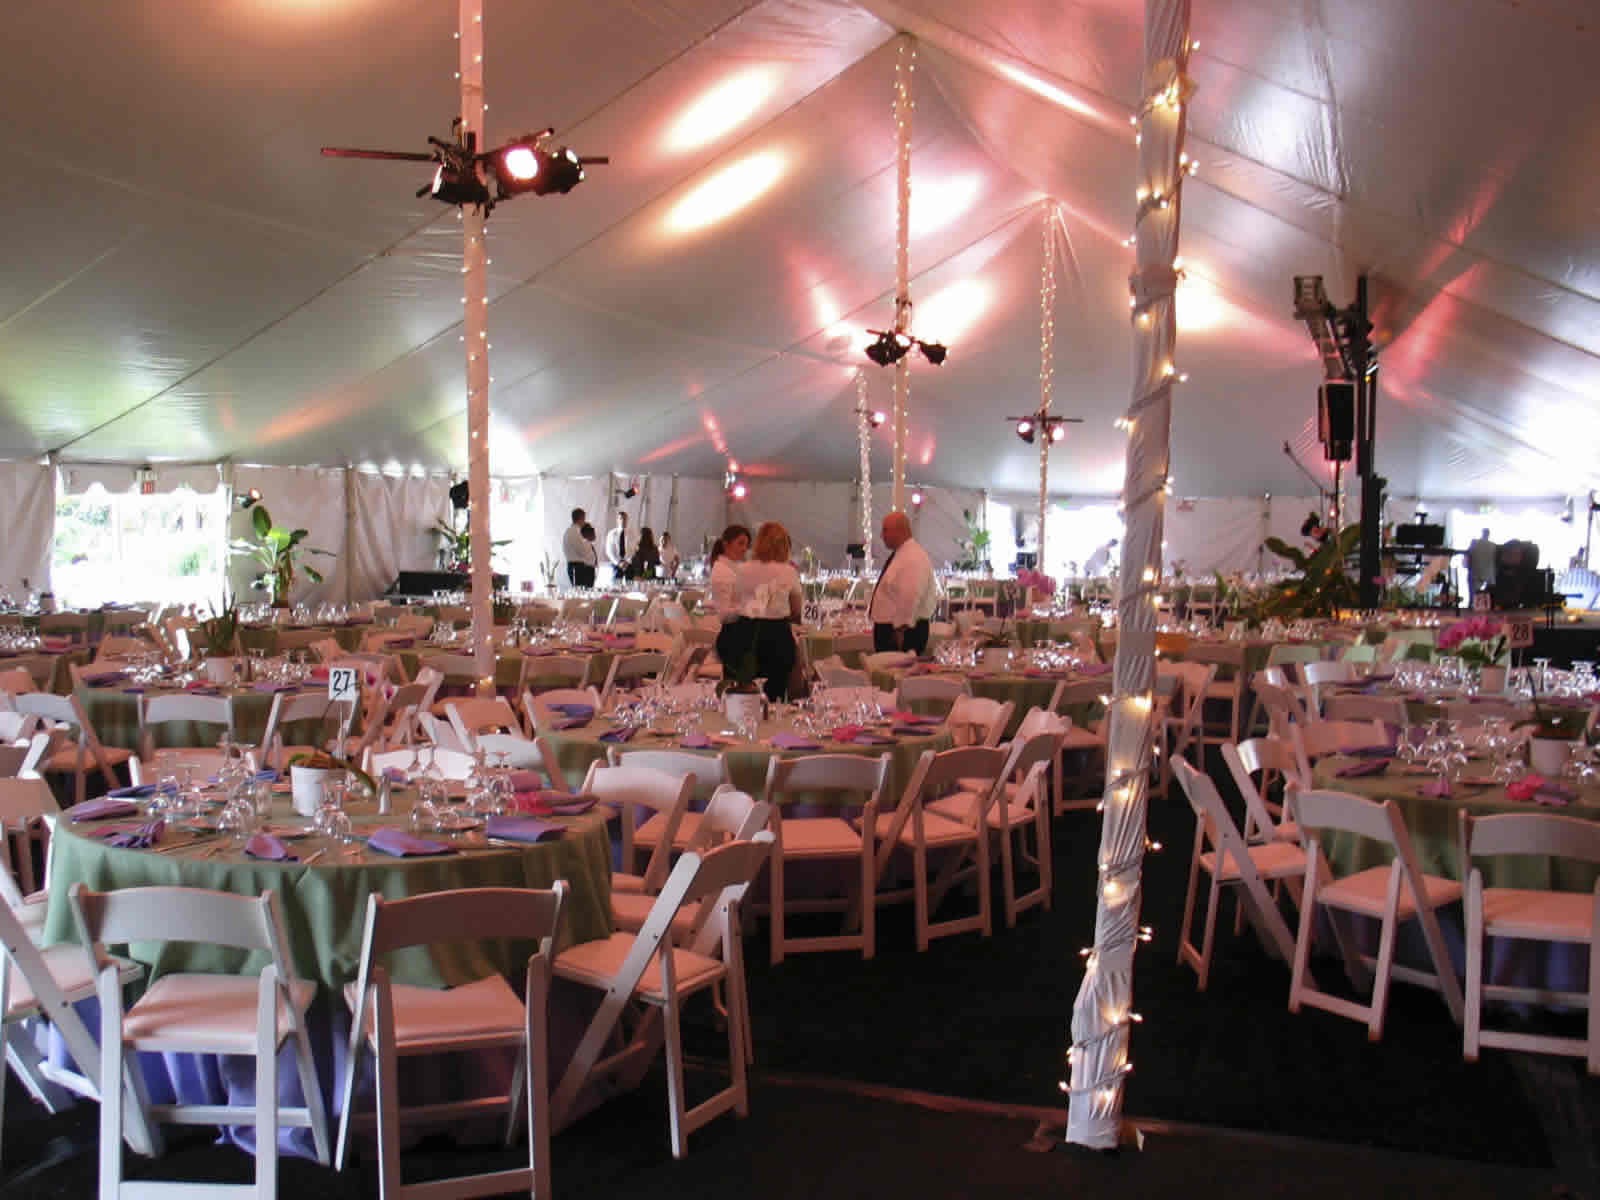 event tables, seating and decor